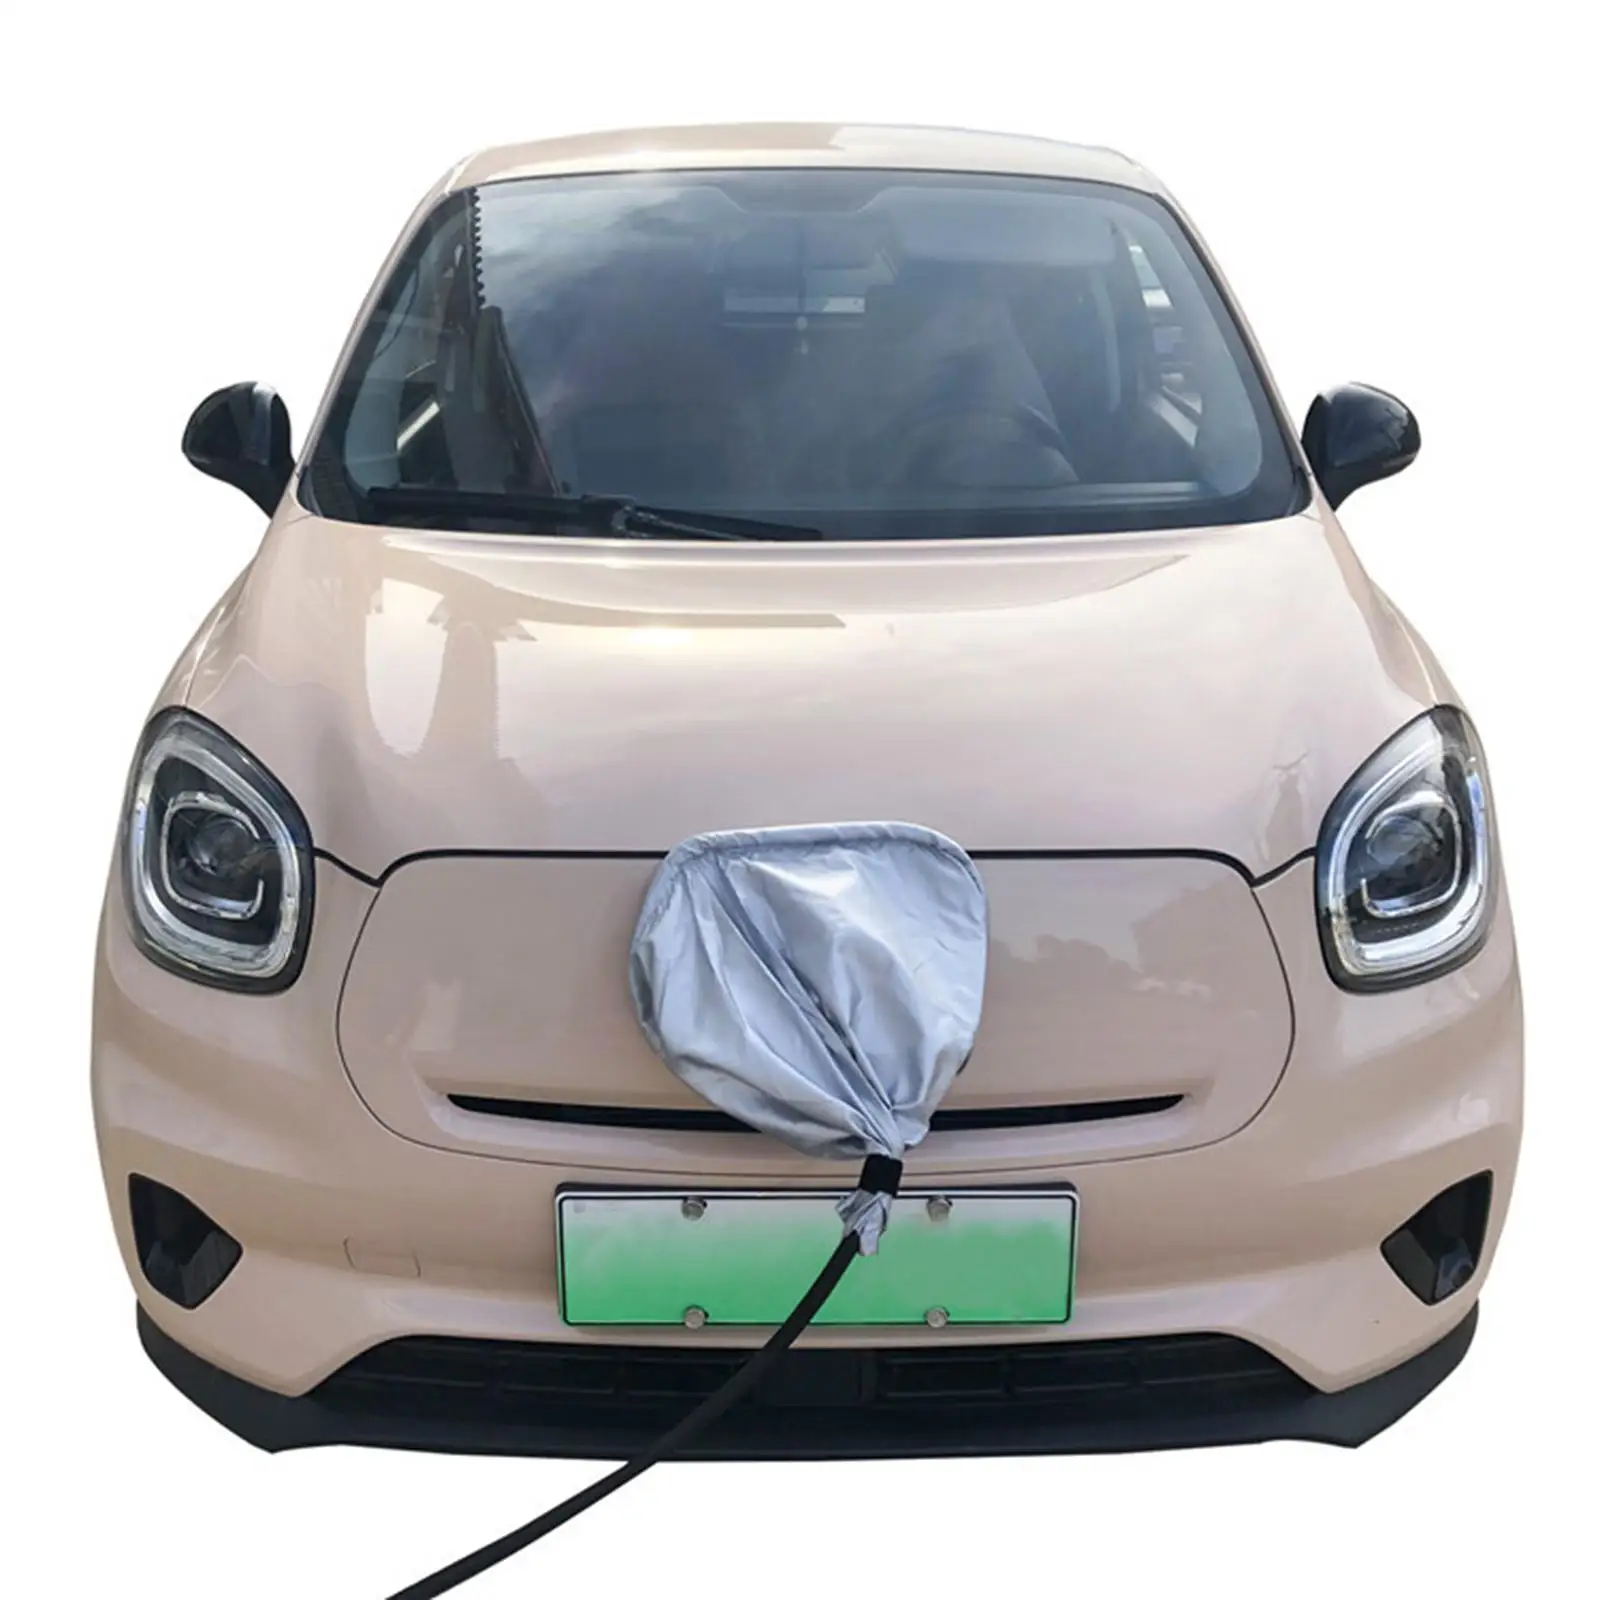 EV New Energy Vehicles Charger rain Cover Universal Dust Protection